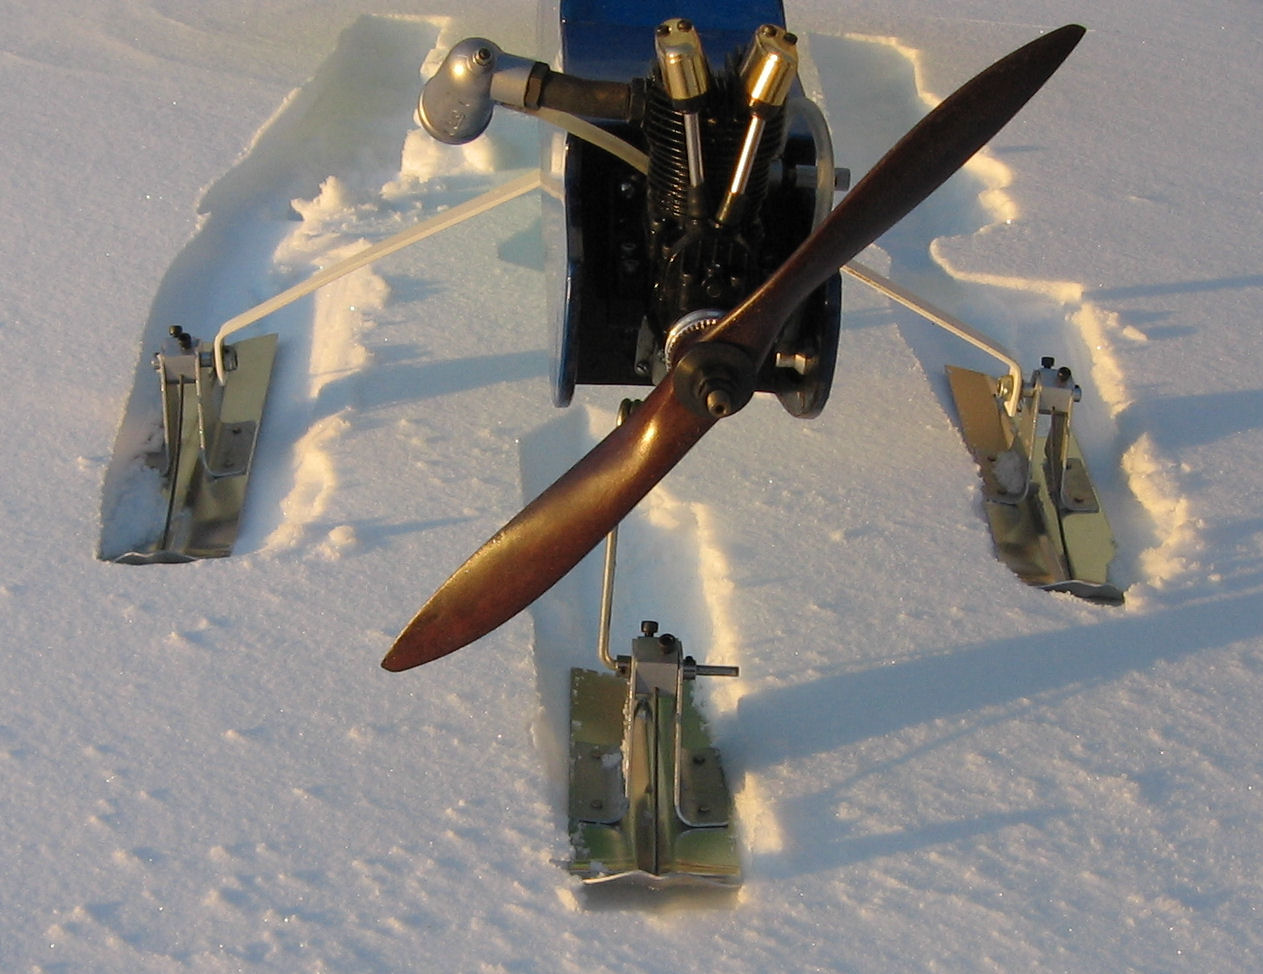 Standard Tricycle Snow Skis for R/C model airplanes